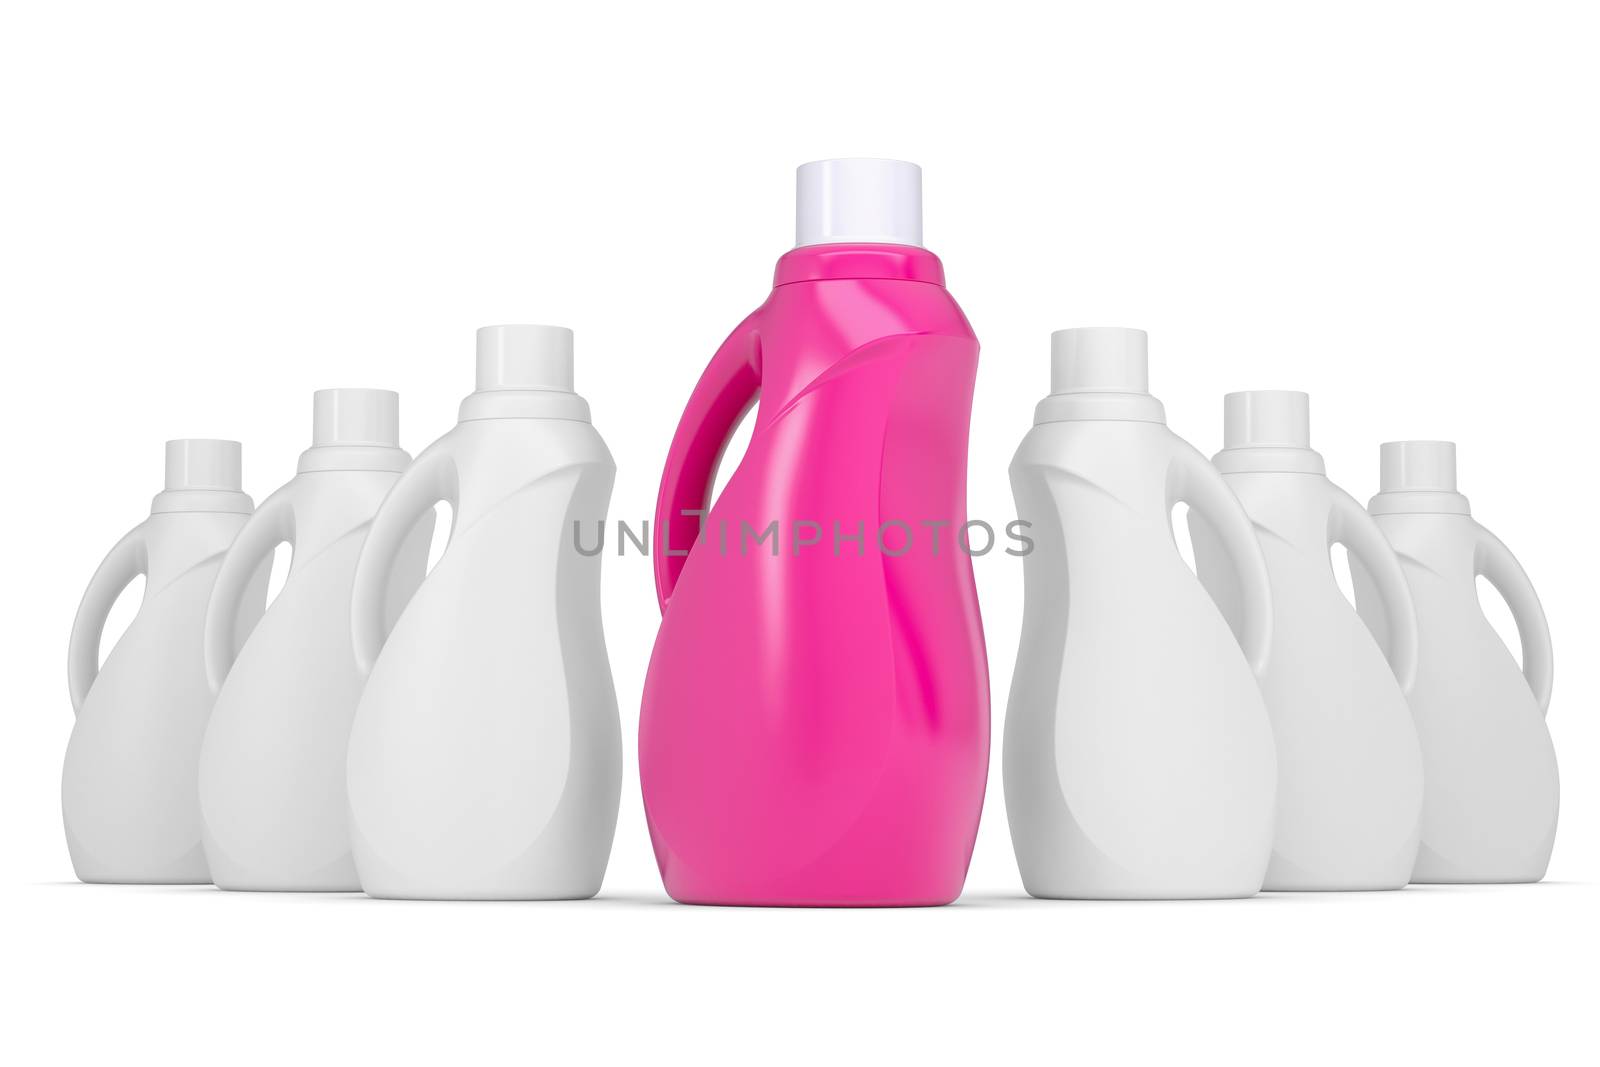 Series plastic bottles of household chemicals by cherezoff